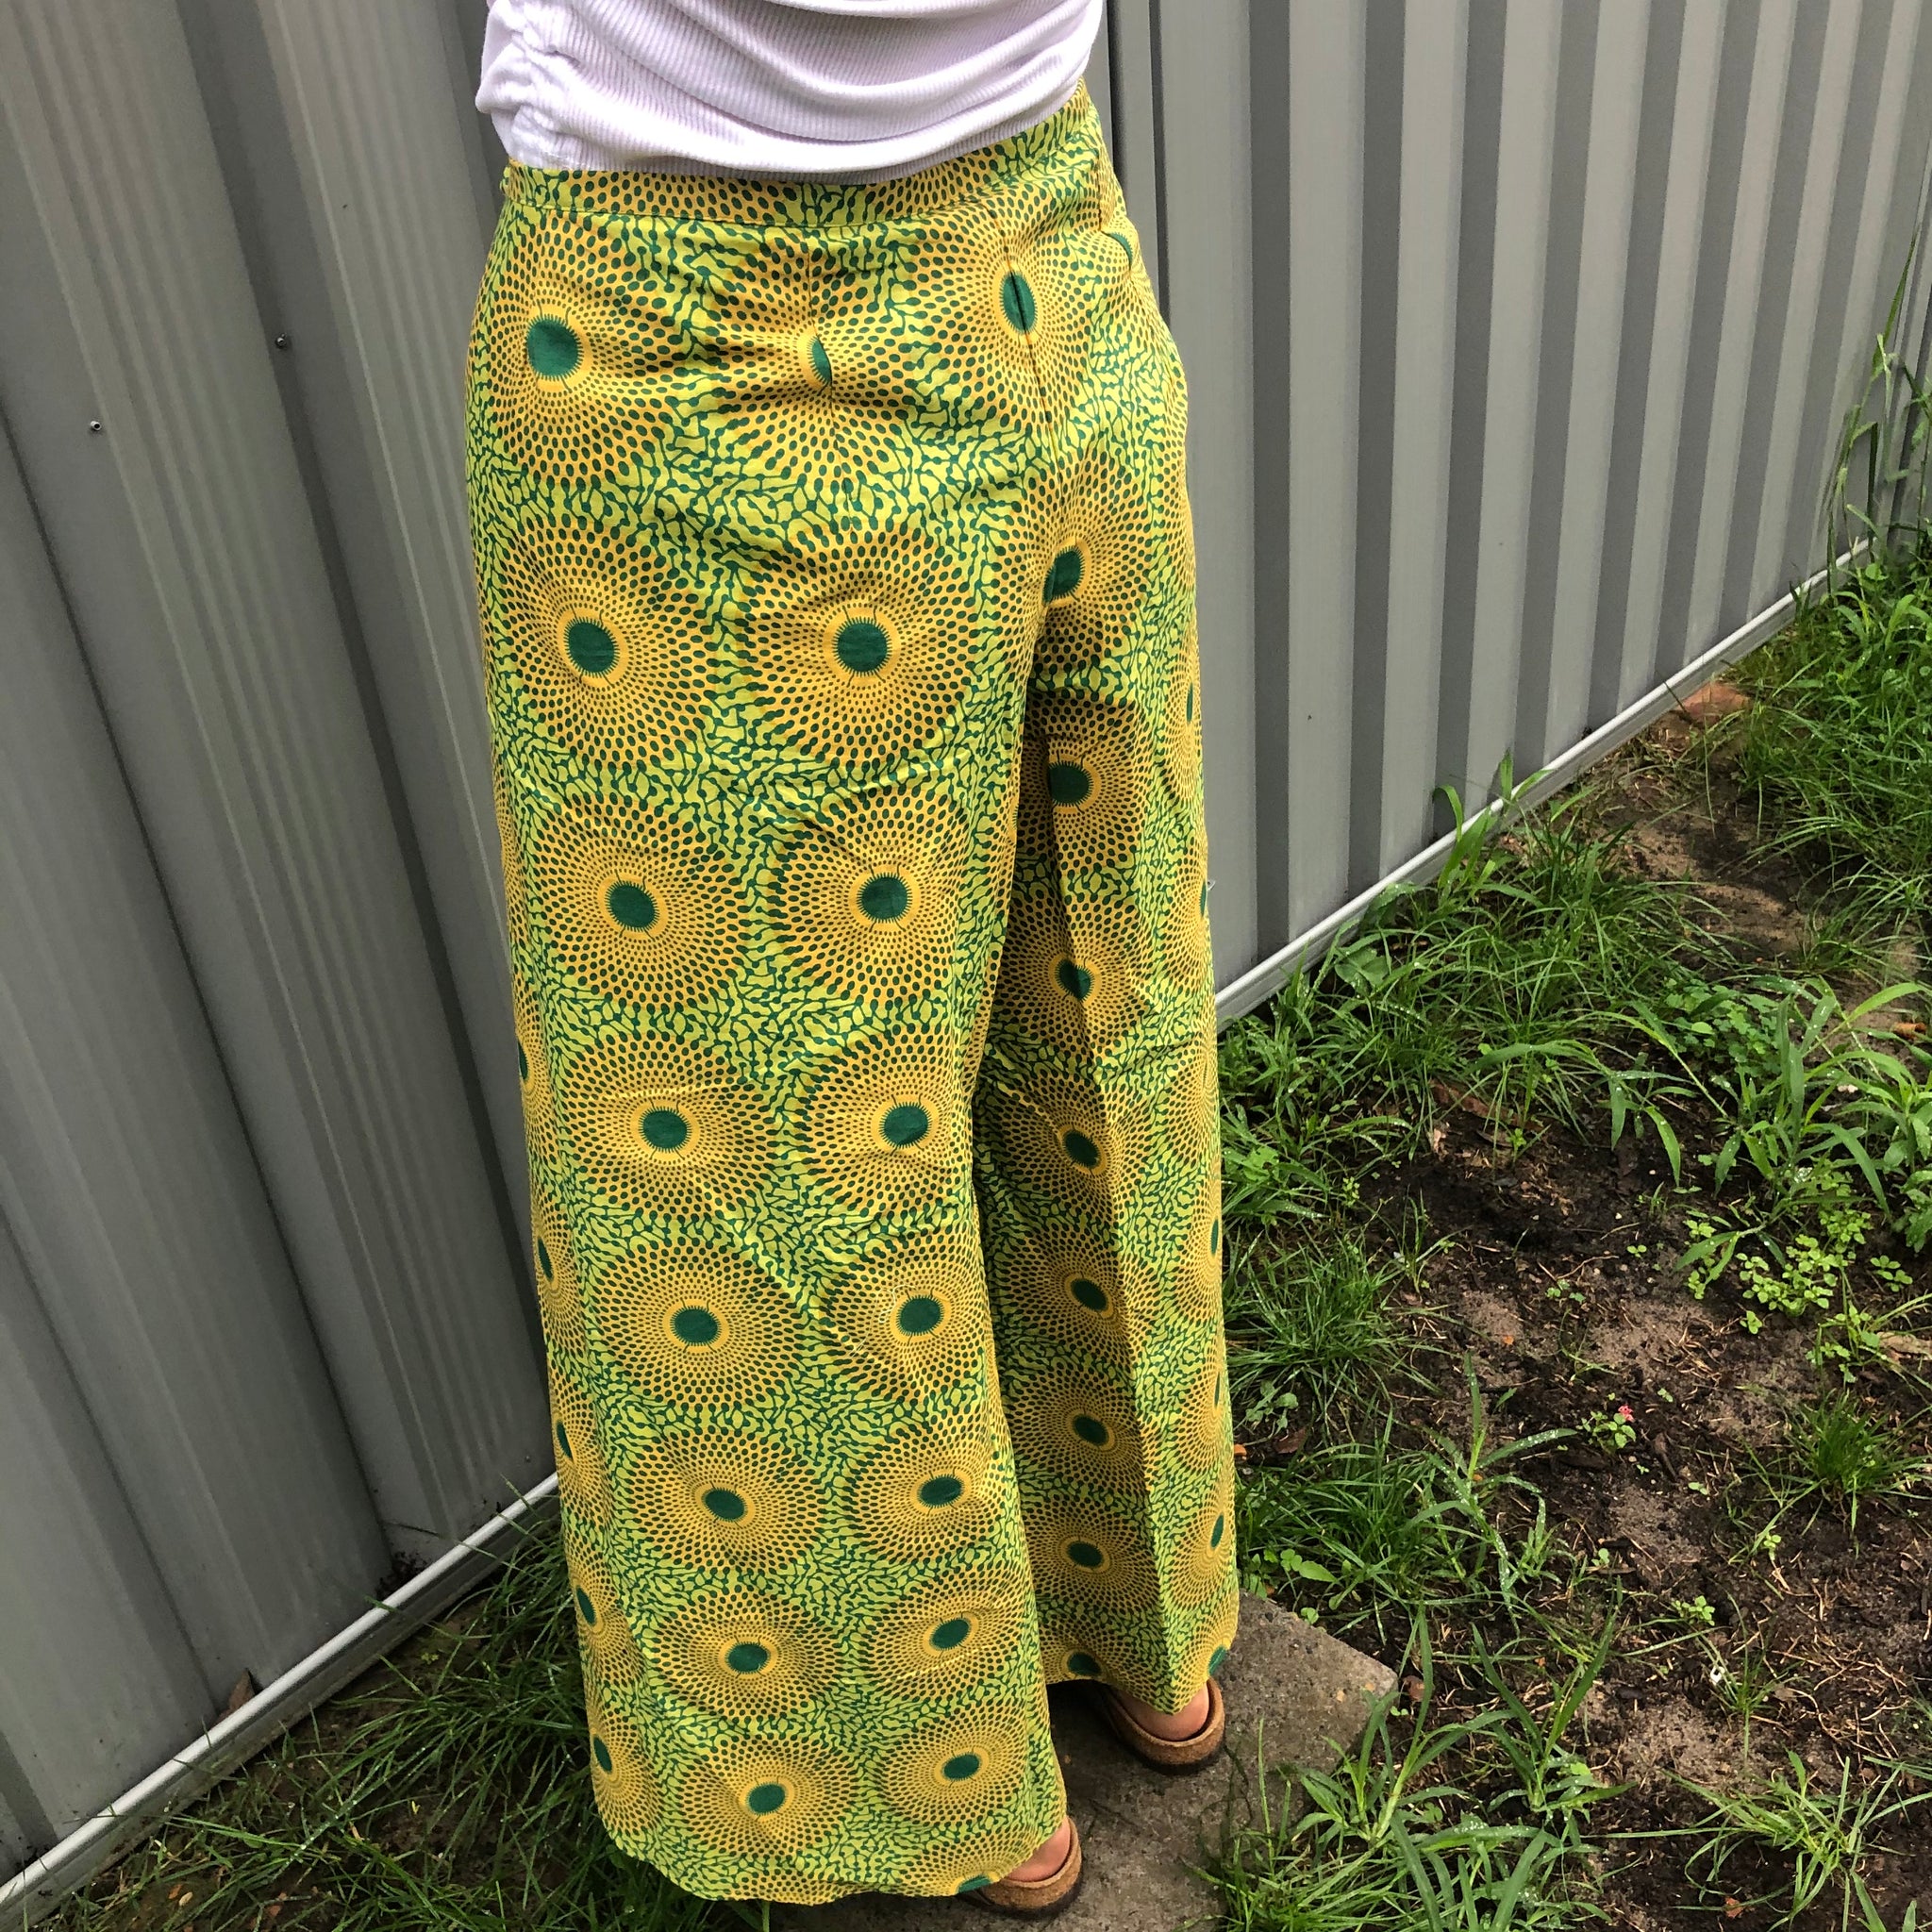 Fair Trade Ethical Cotton Print Wrap Pants in Yellow and Green